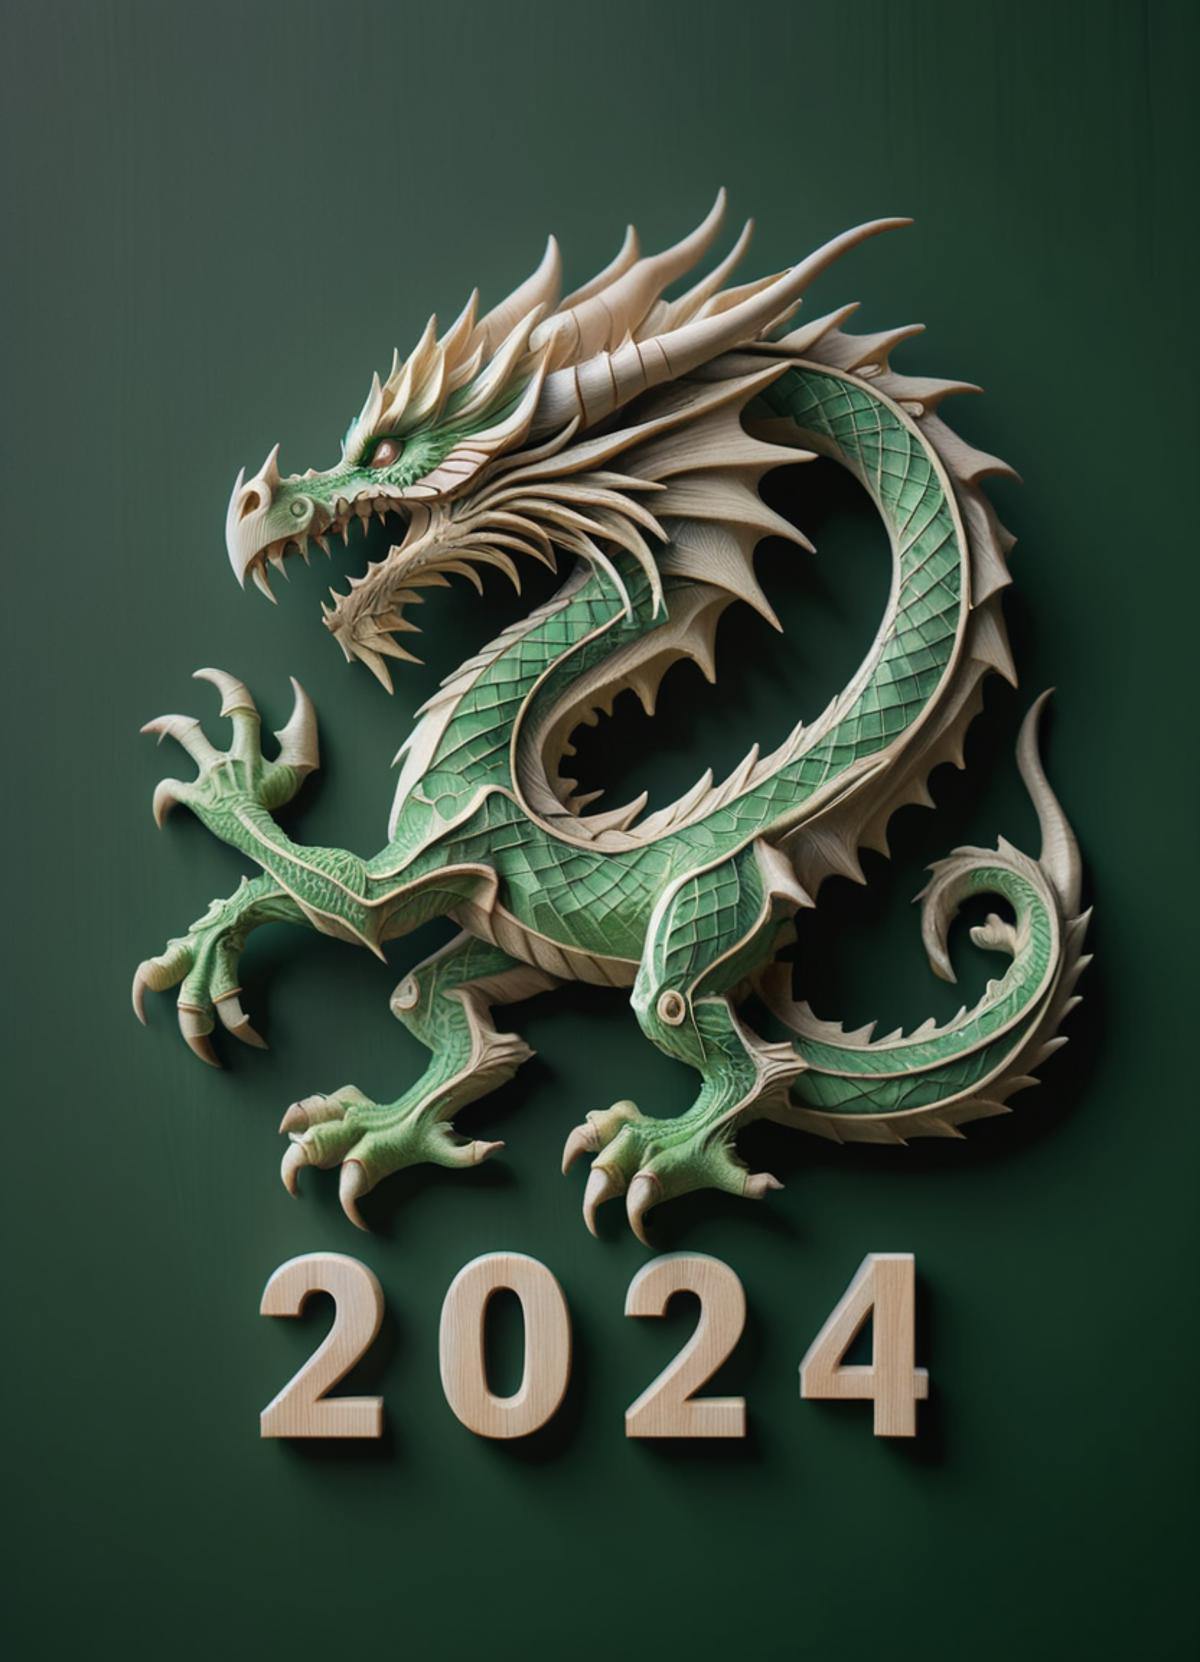 Green Dragon Statue for 2024 with the Year "2024" Below It